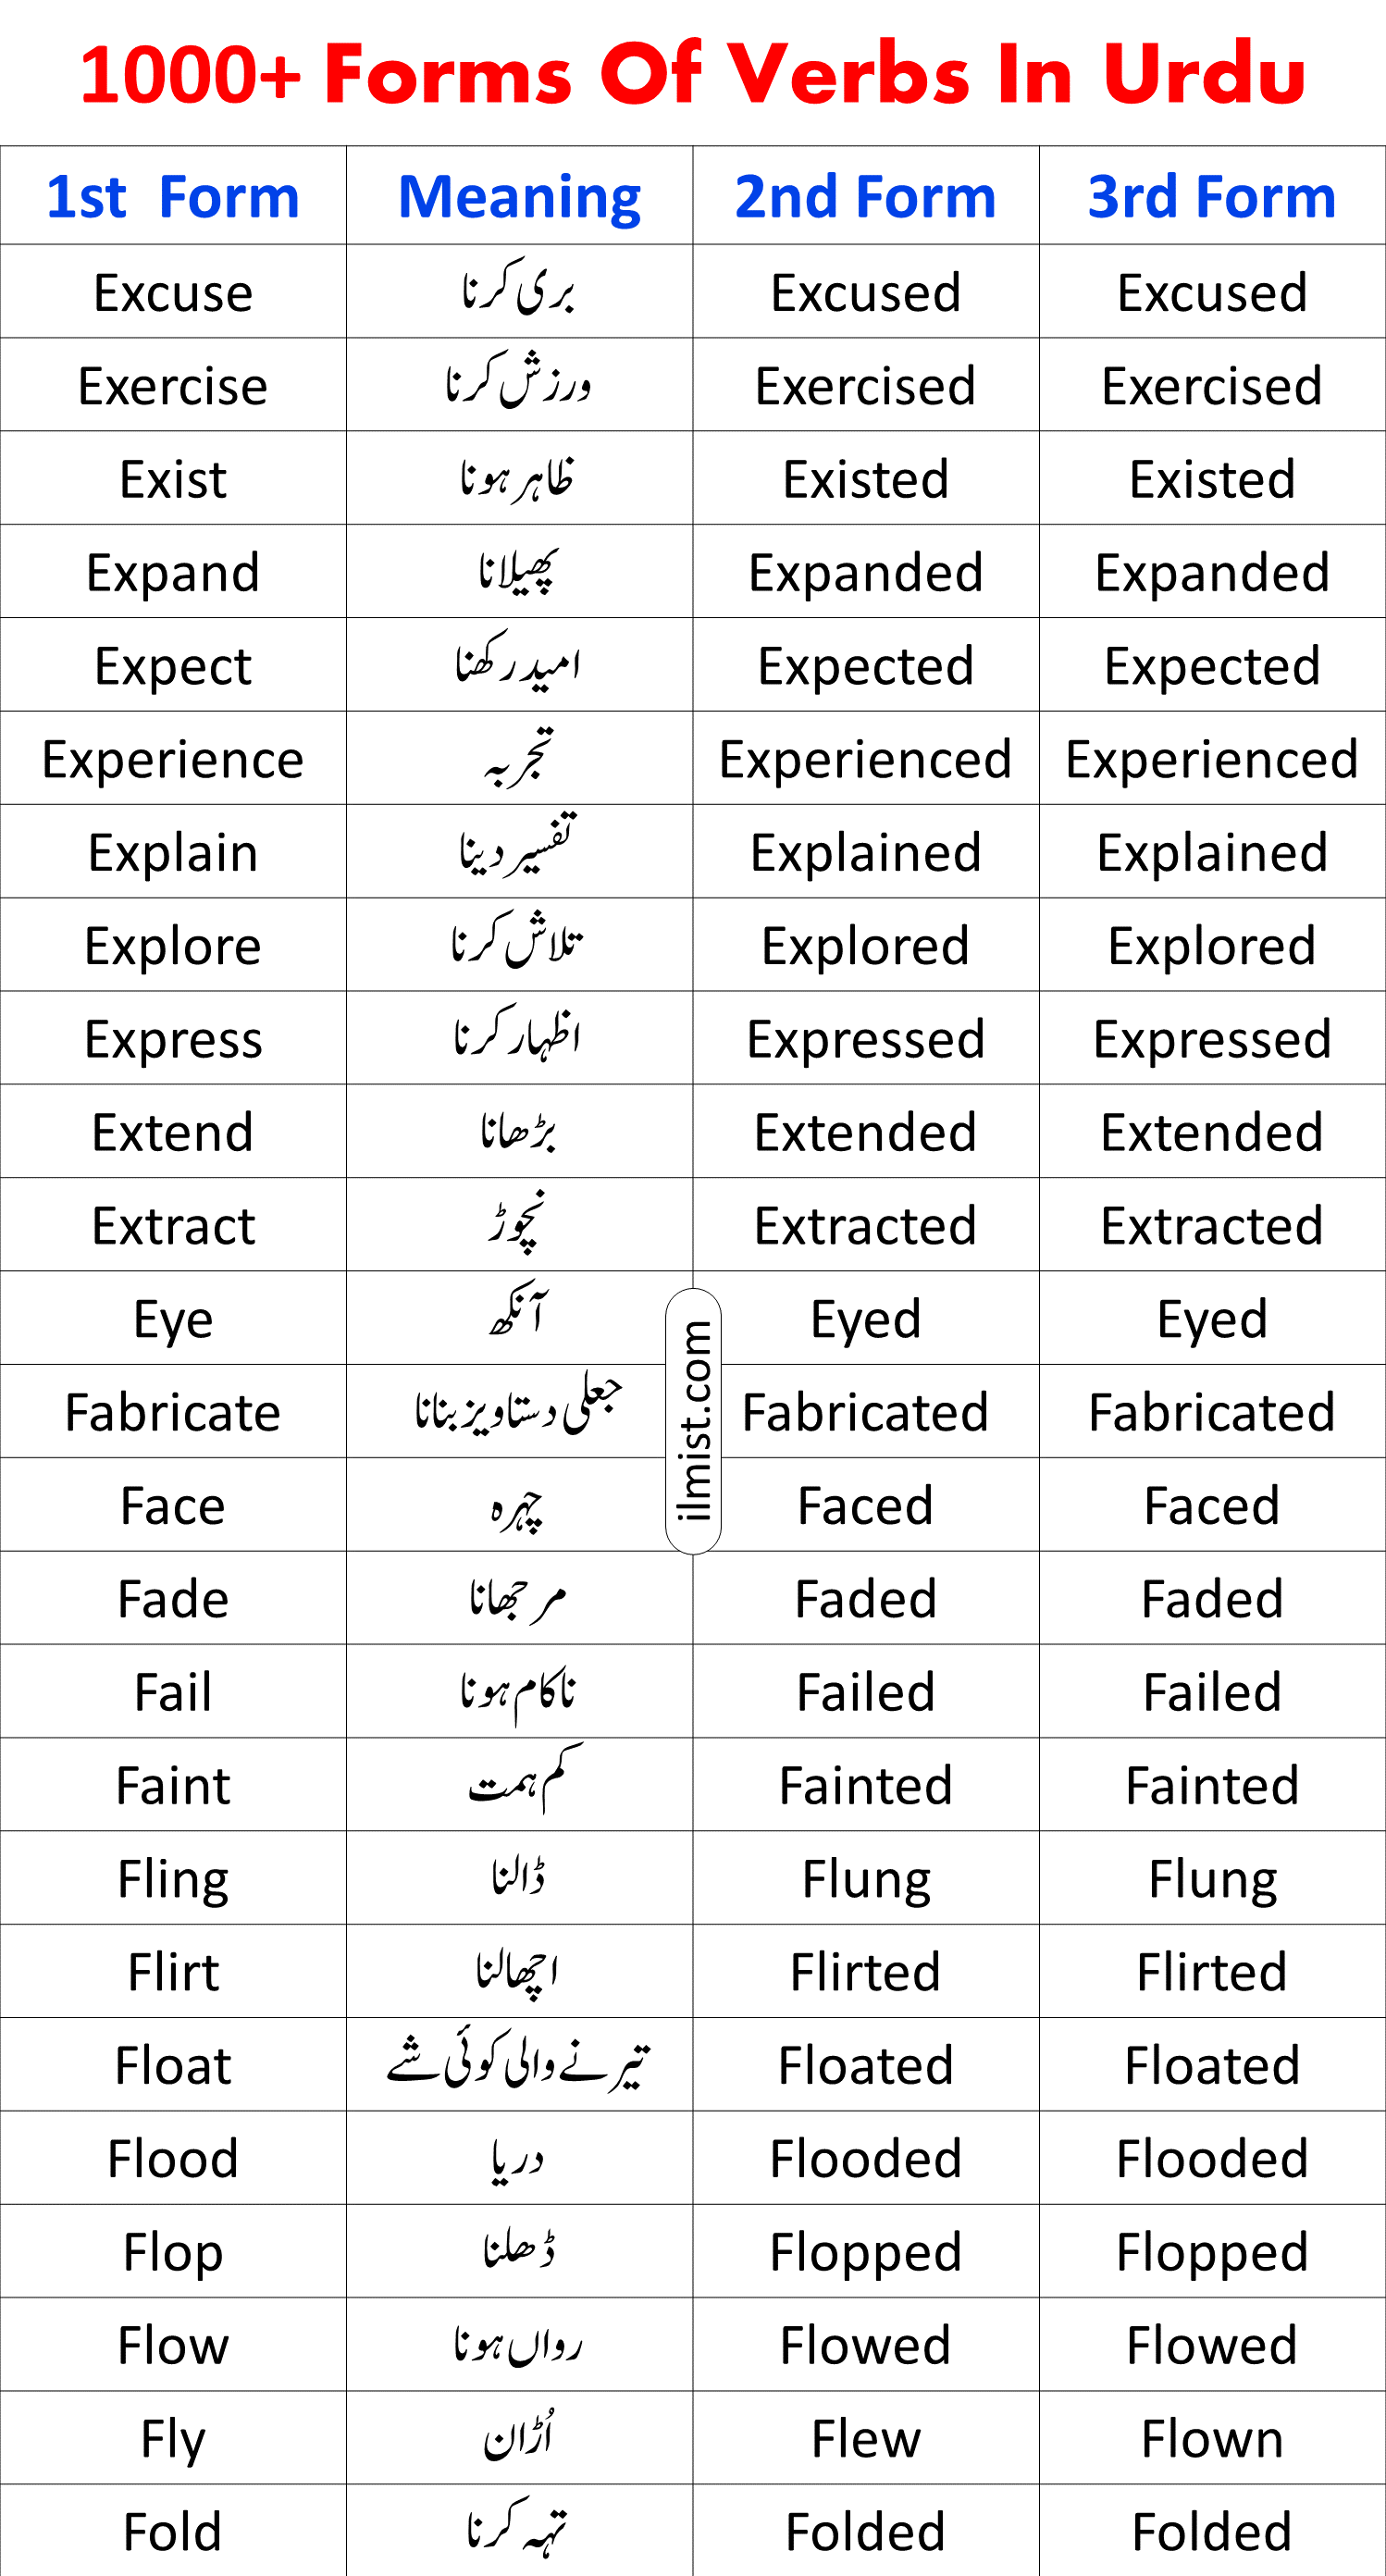 1000+ Forms Of Verbs In English With Urdu Meanings | 1st, 2nd, 3rd Forms